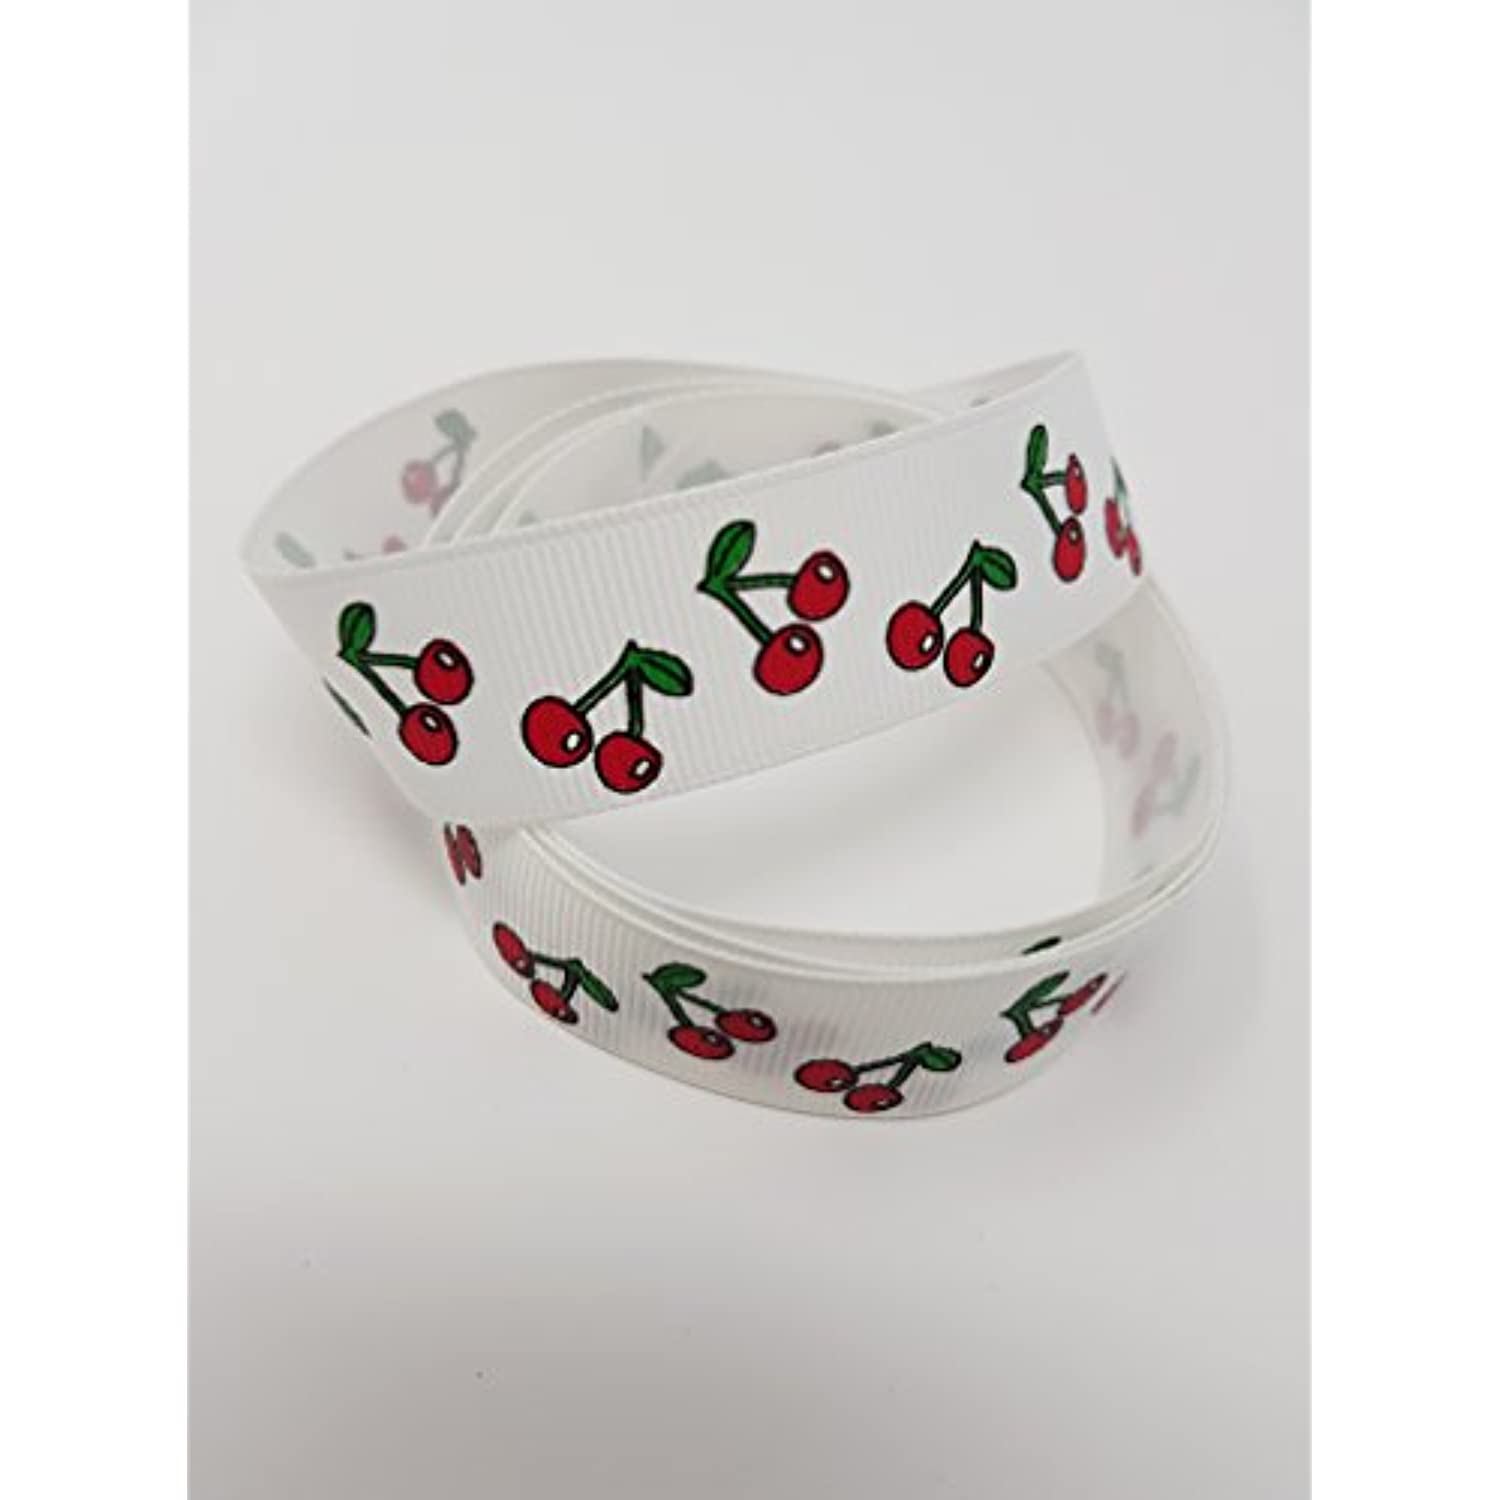 Polyester Grosgrain Ribbon for Decorations, Hairbows & Gift Wrap by Yame Home (7/8-in by 3-yds, 00026538 - Cherries w/White background)